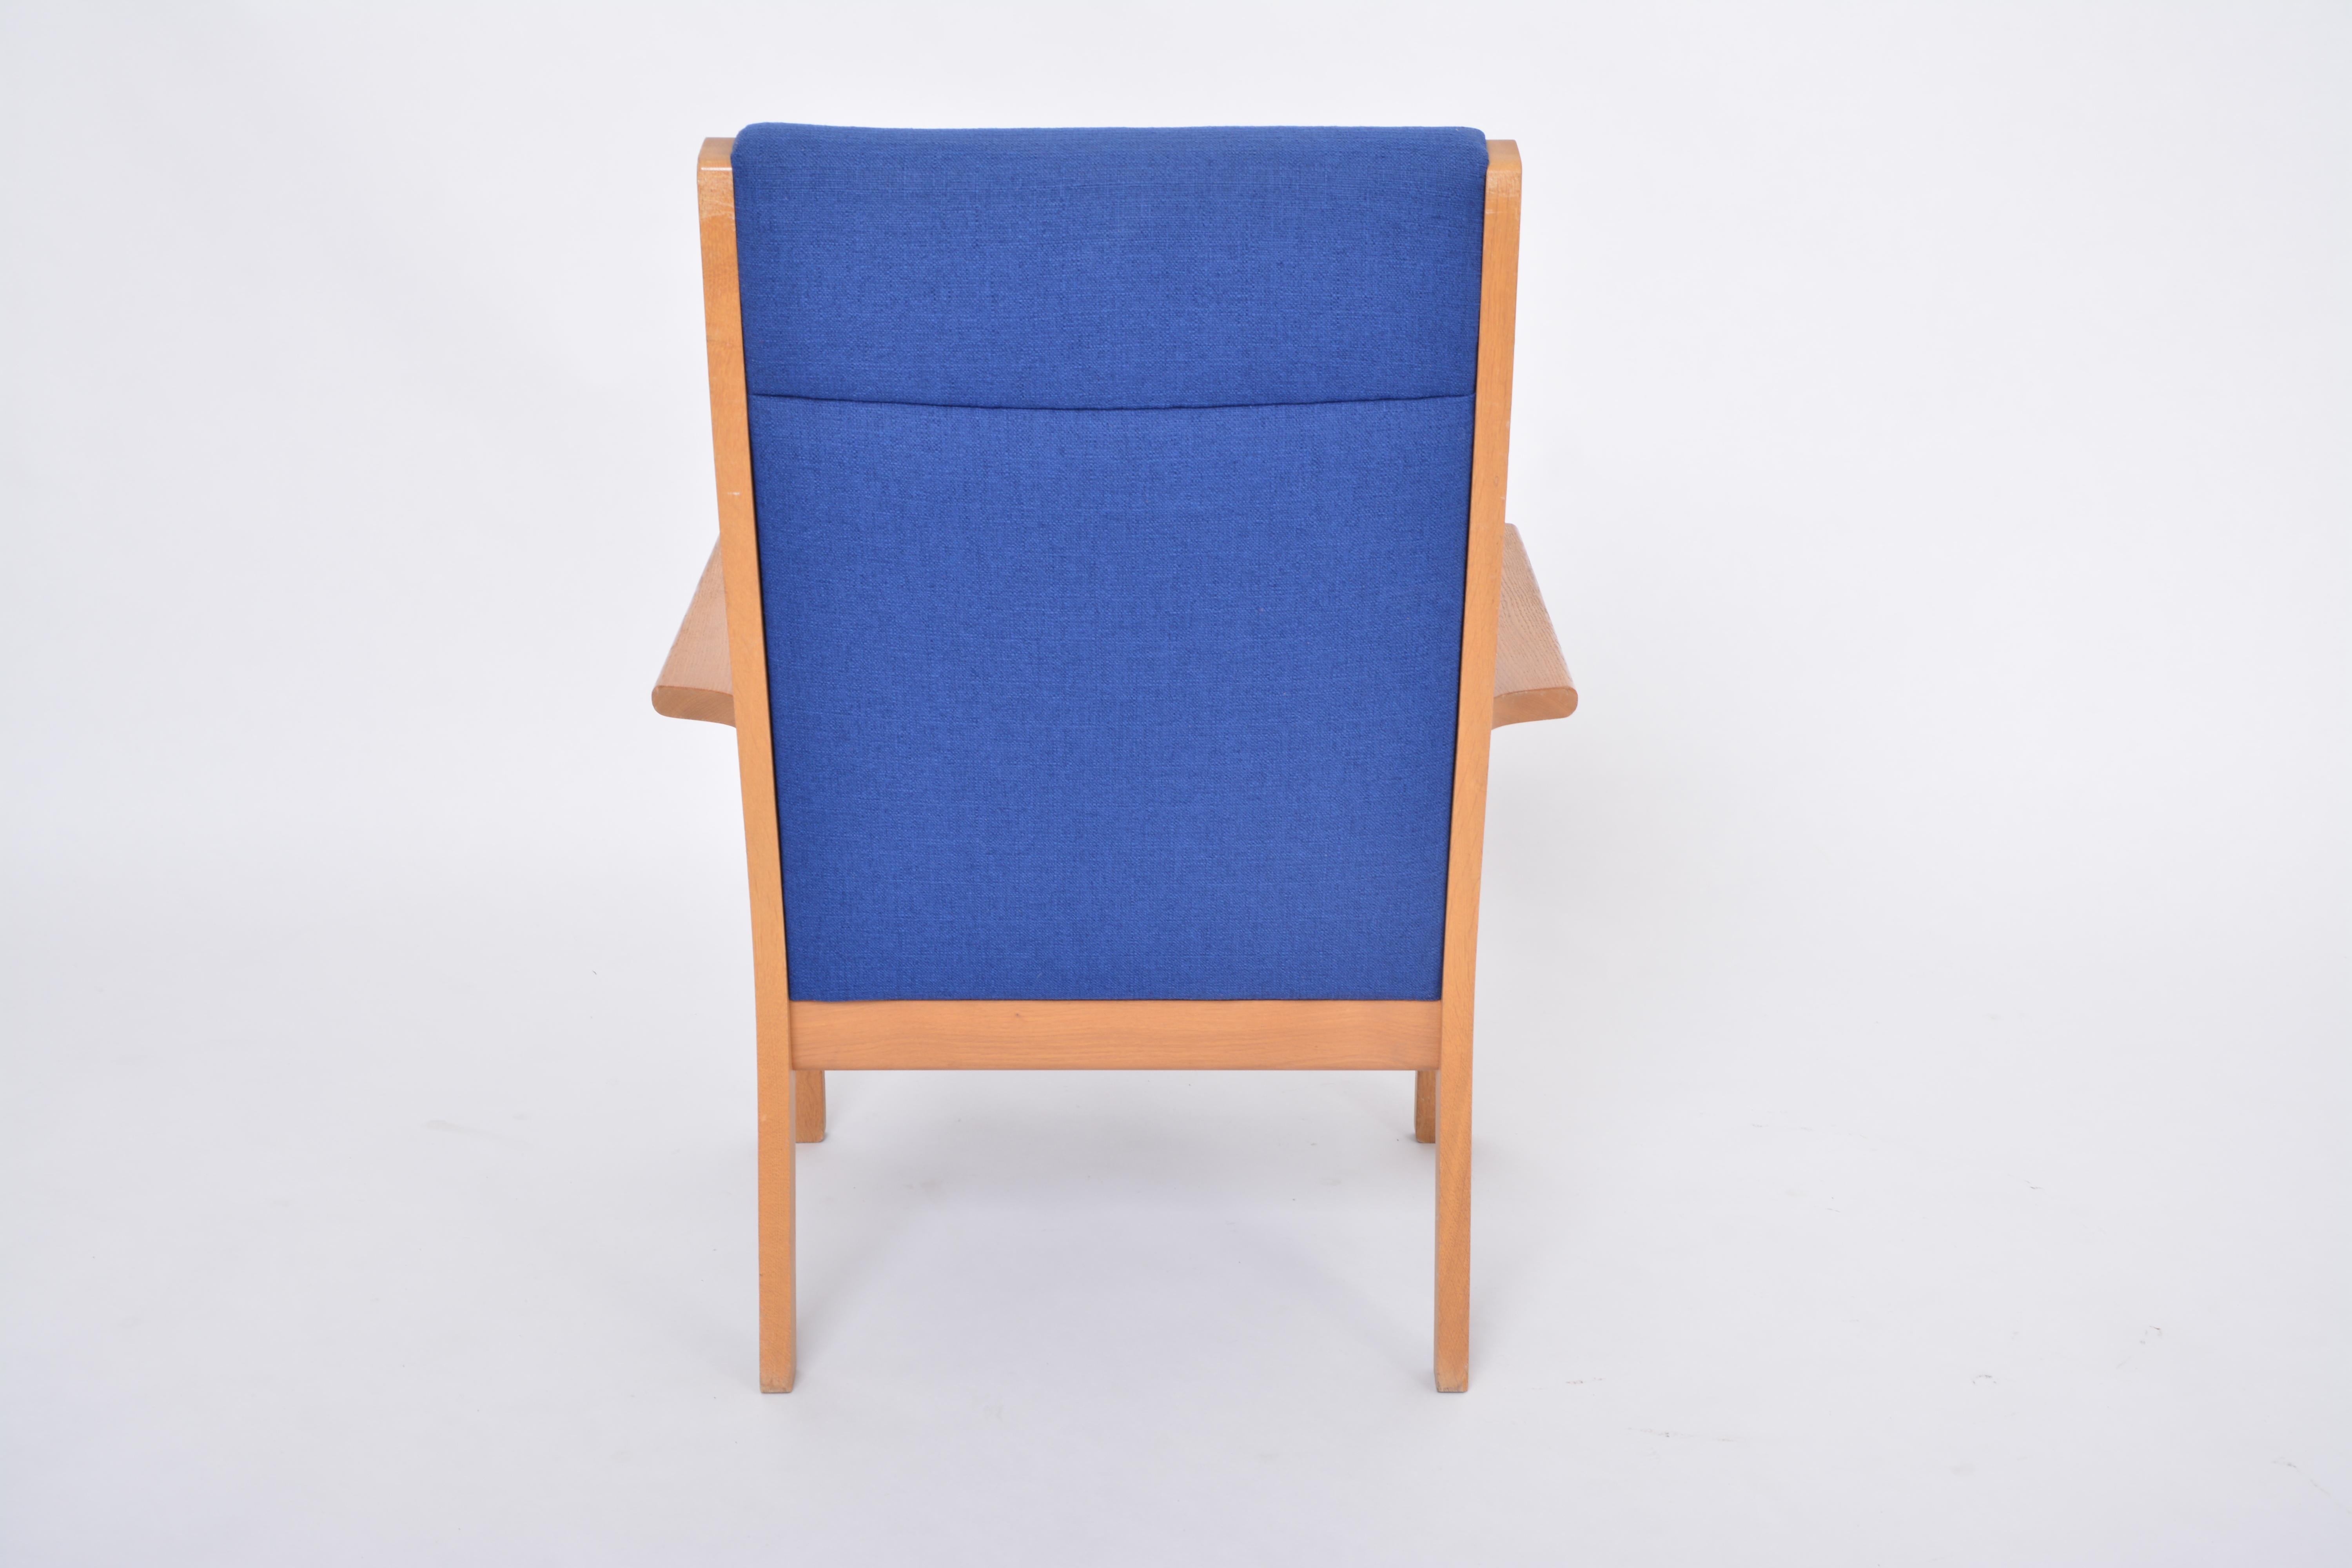 Reupholstered Danish Mid-Century Modern GE 181 a Chair by Hans Wegner for GETAMA For Sale 4